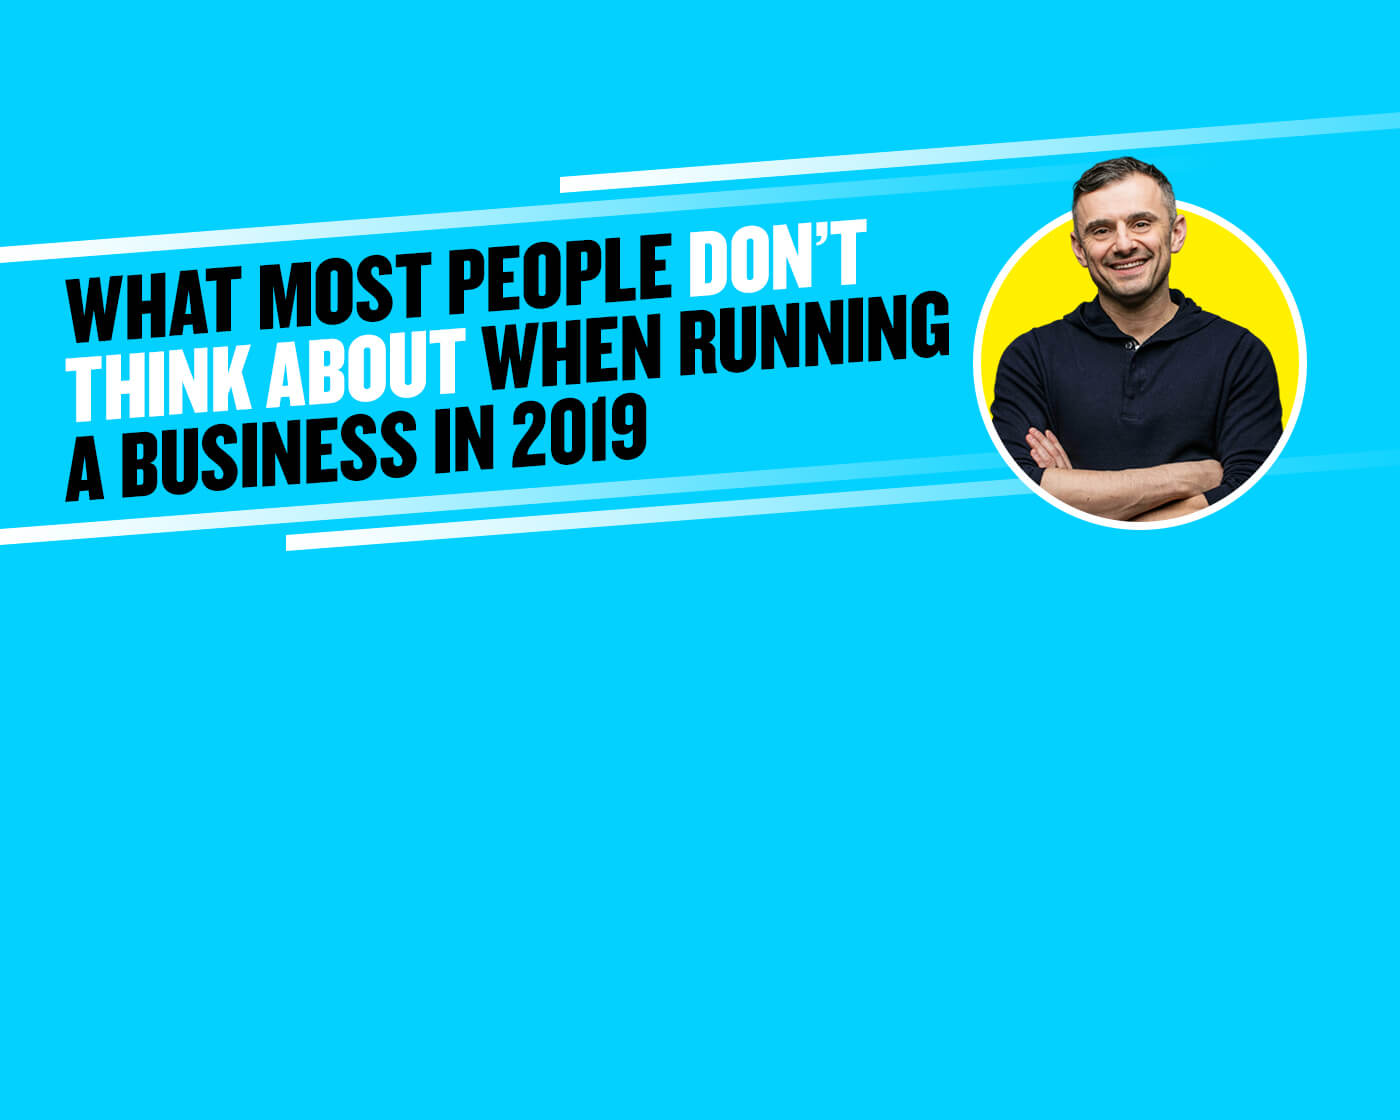 What Most People Don’t Think About When Running a Business in 2019